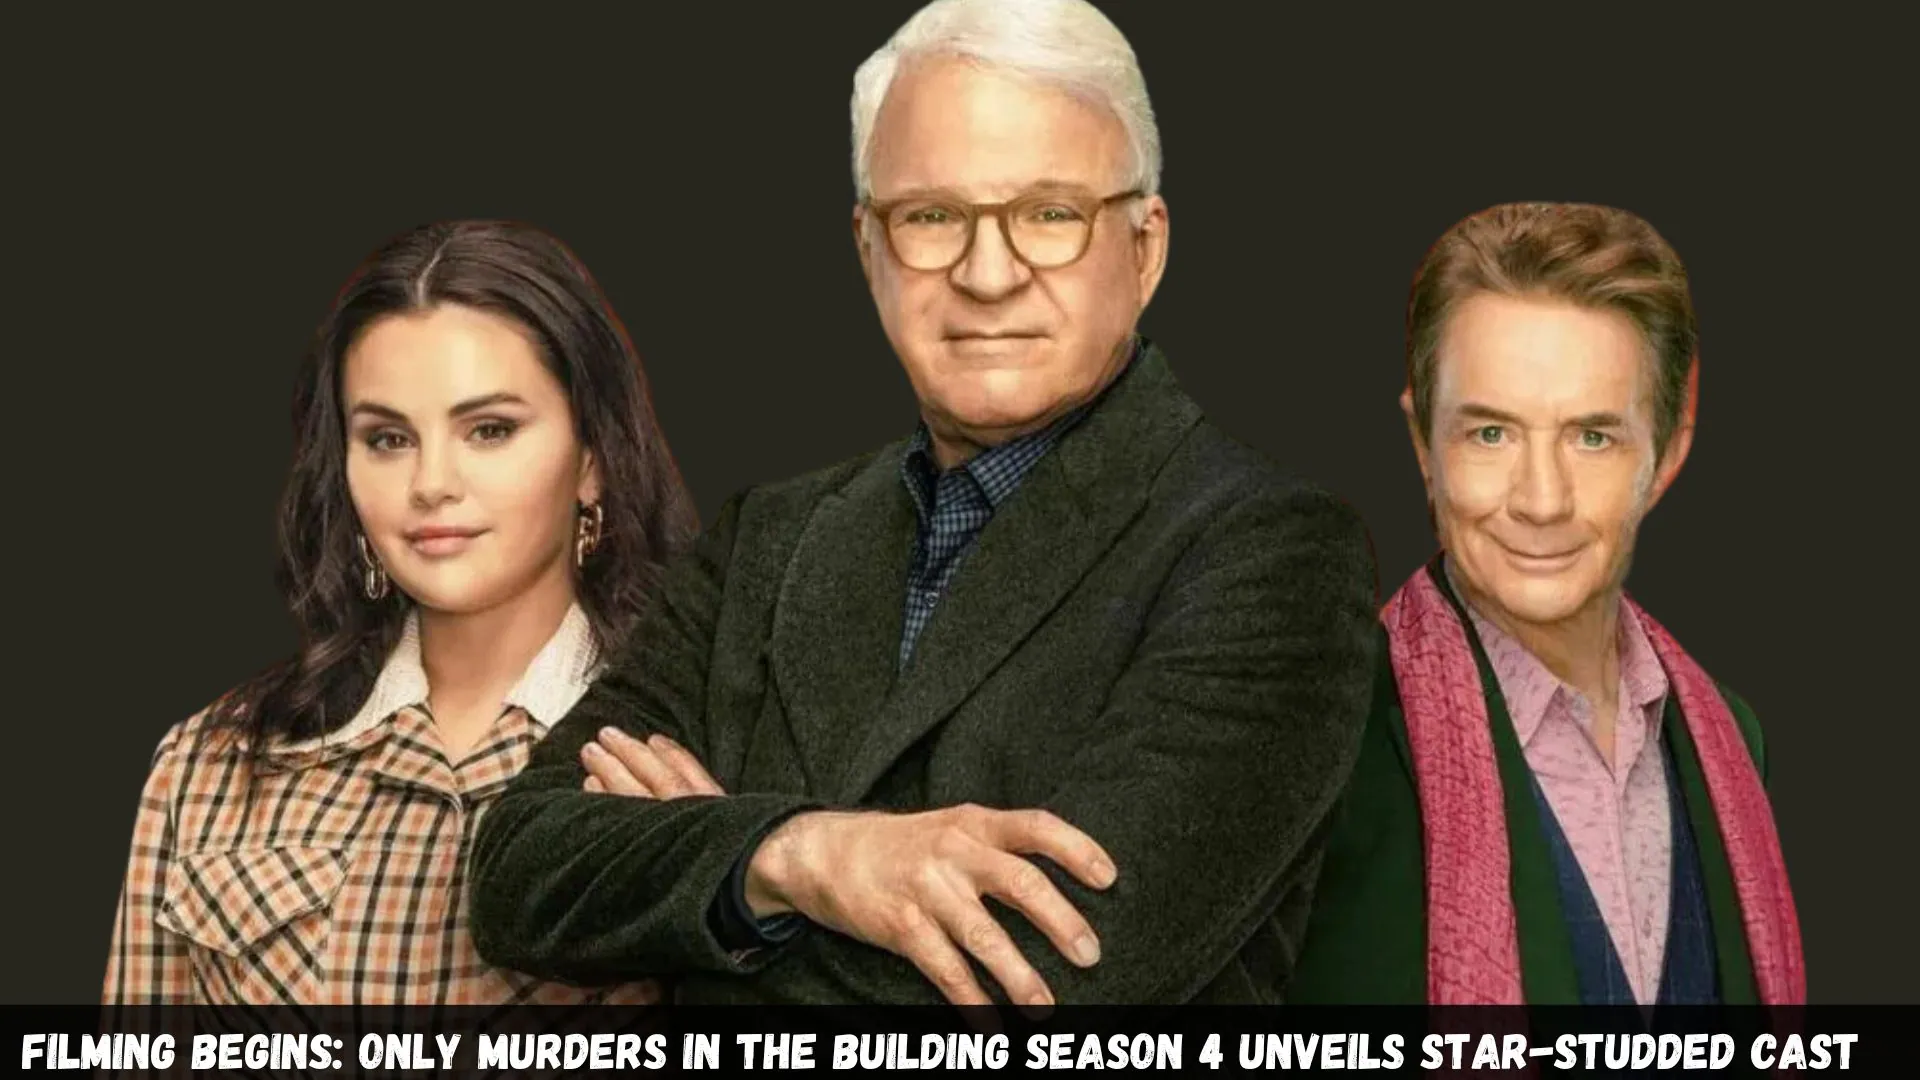 Filming Begins Only Murders in the Building Season 4 Unveils Star-Studded Cast